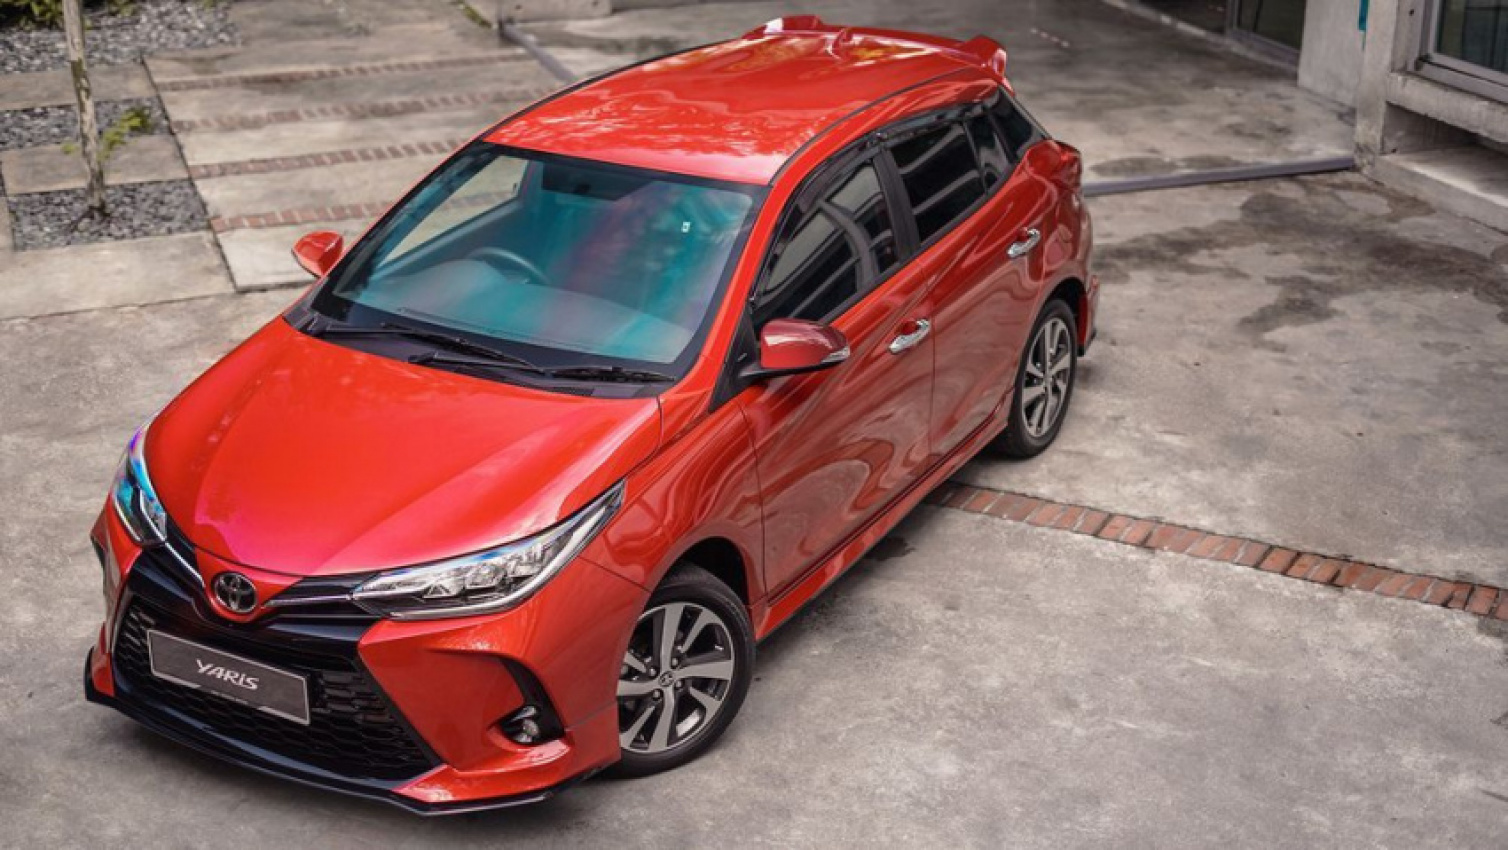 autos, cars, honda, toyota, 1.5g, 1.5v, android, buying guides, honda city, honda city hatchback, toyota yaris, android, honda city hatchback 1.5v vs toyota yaris 1.5g – hatchback bawah rm90,000